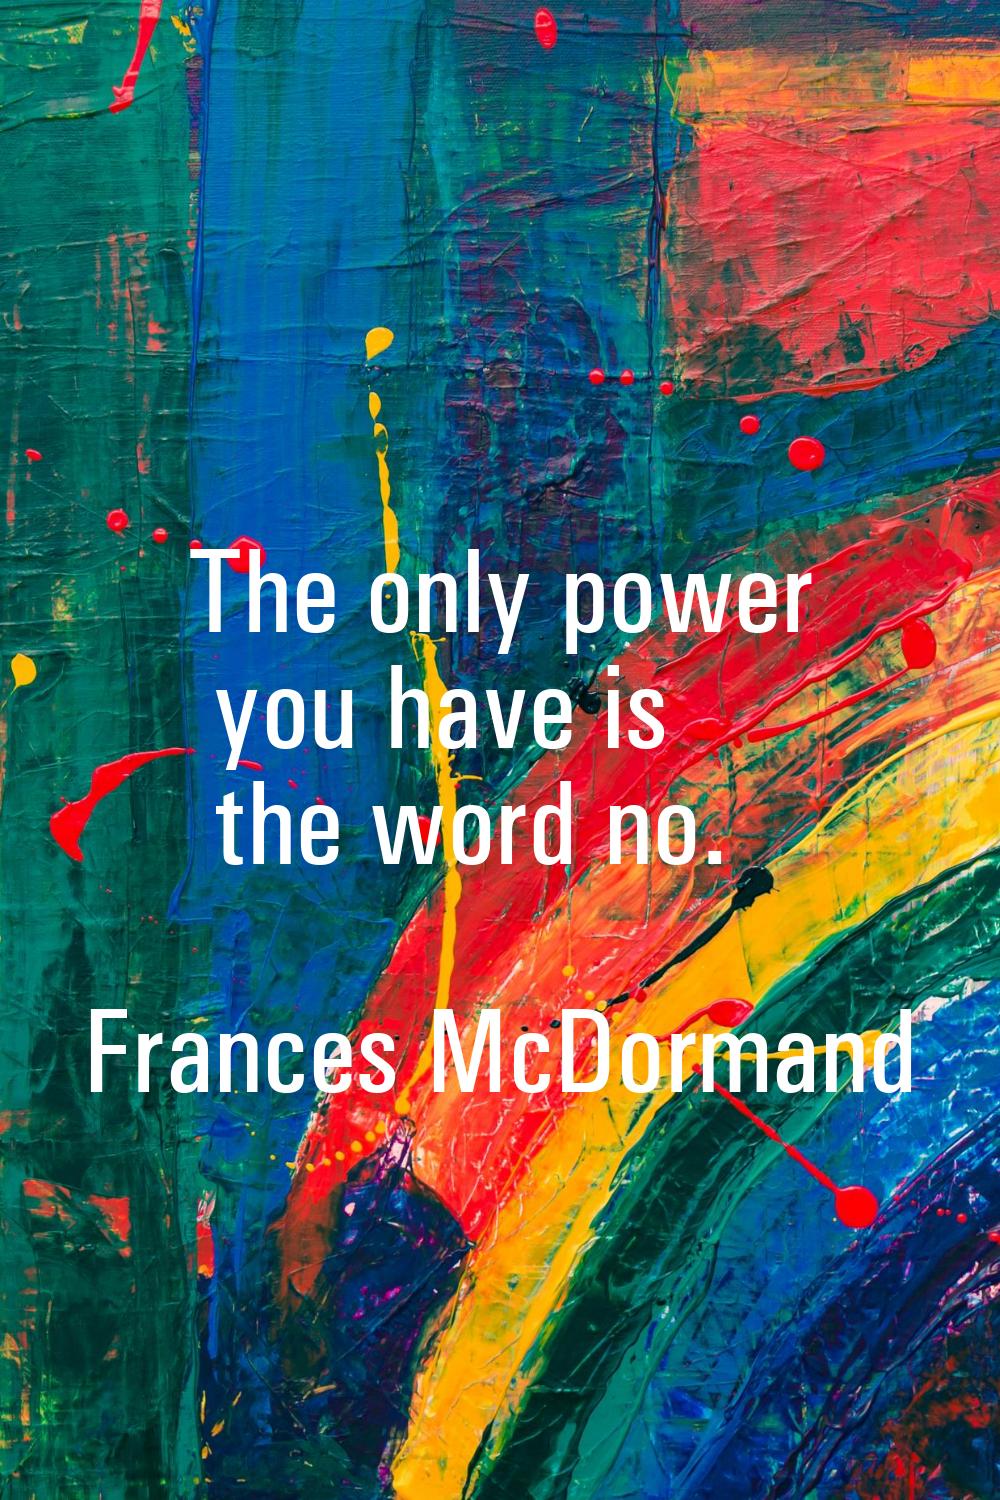 The only power you have is the word no.